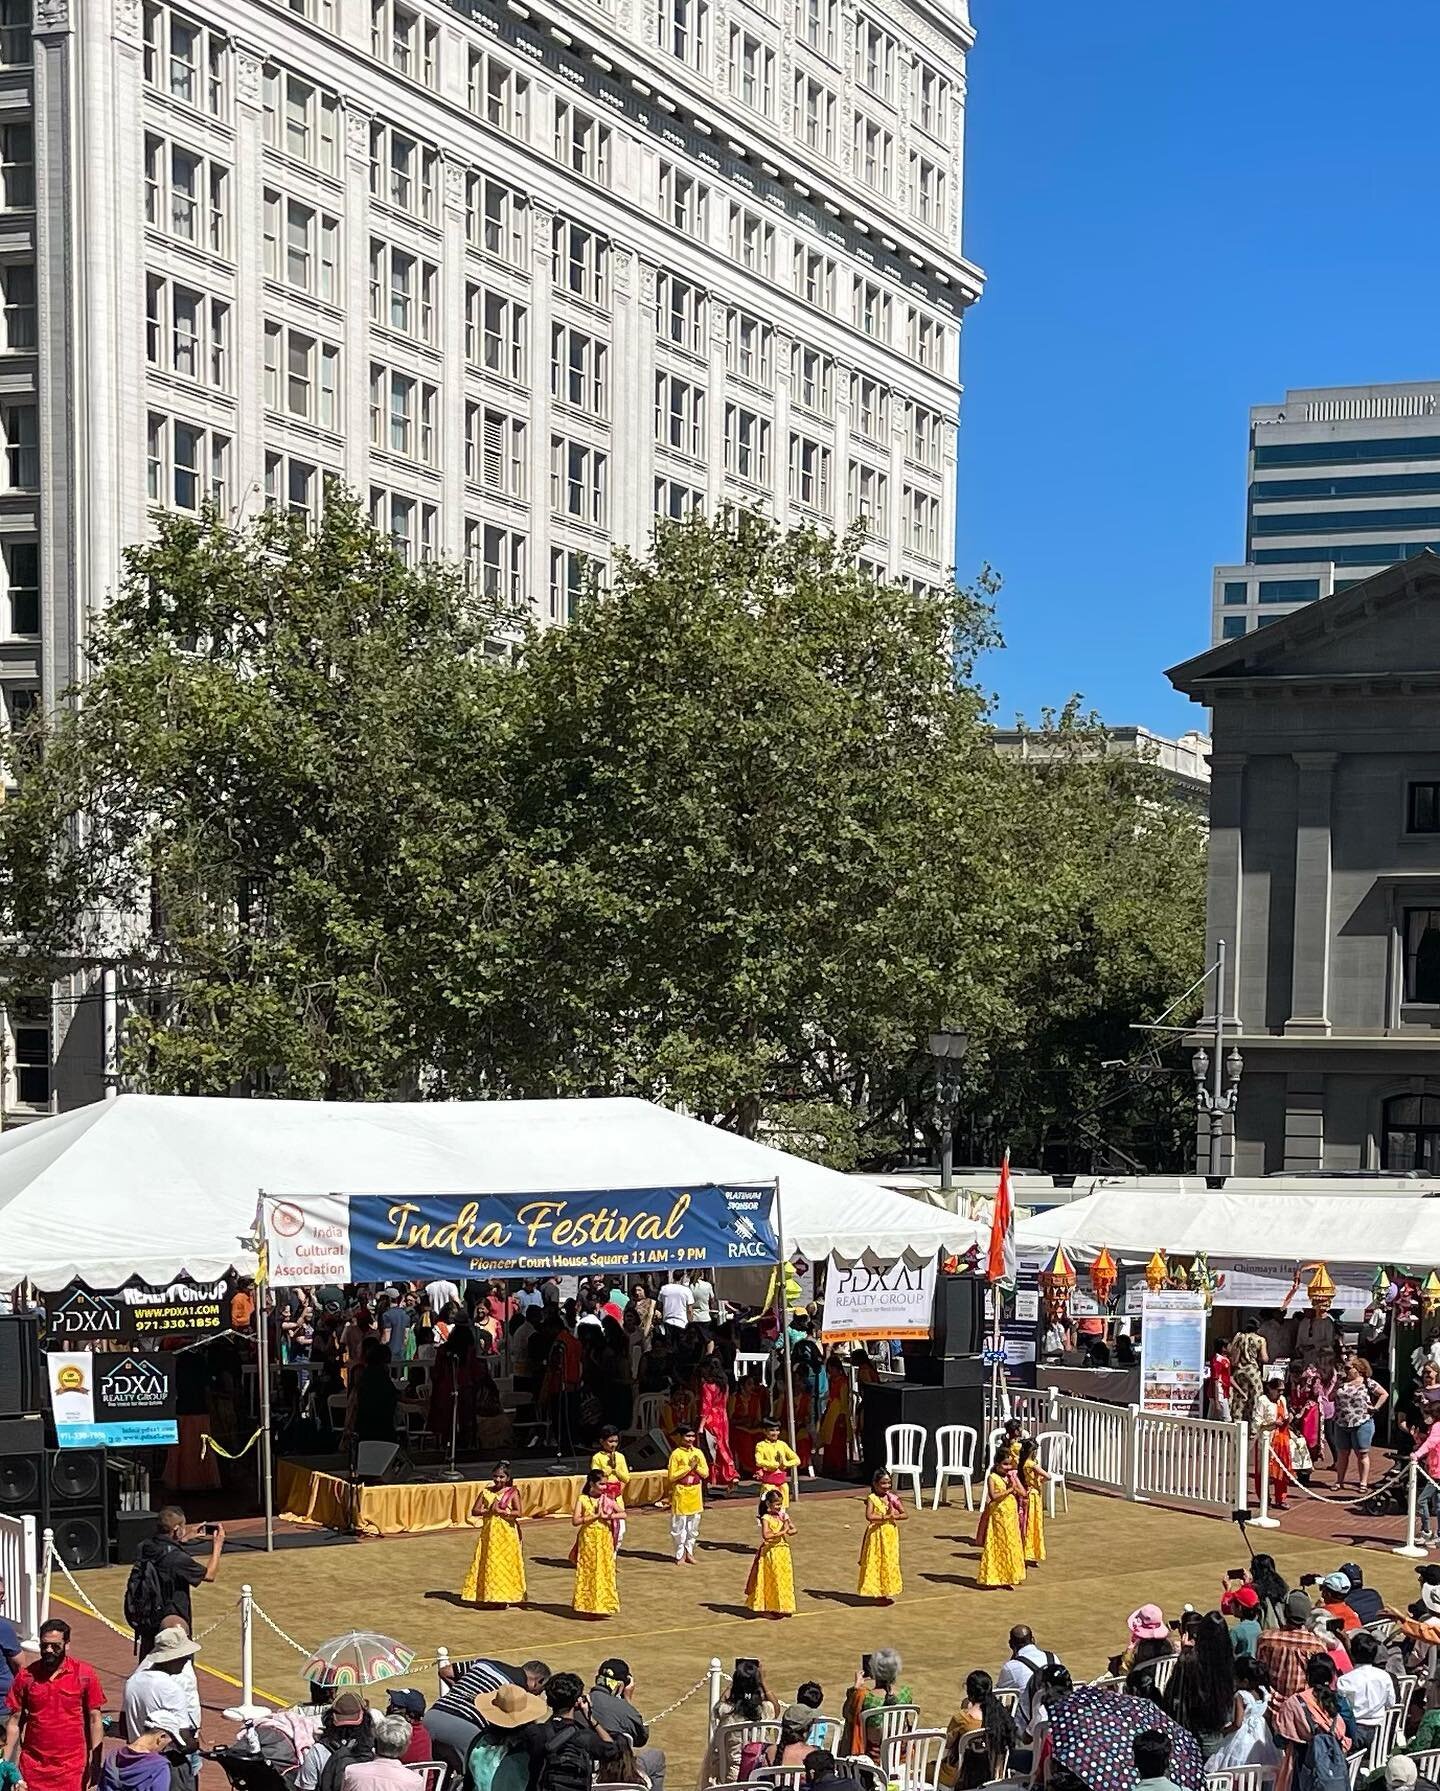 Thousands came to @thesquarepdx for the return of the India Festival. Programming public spaces is a key to the recovery of downtown Portland.  #portland #indiafestival #cityandspire #downtownportland